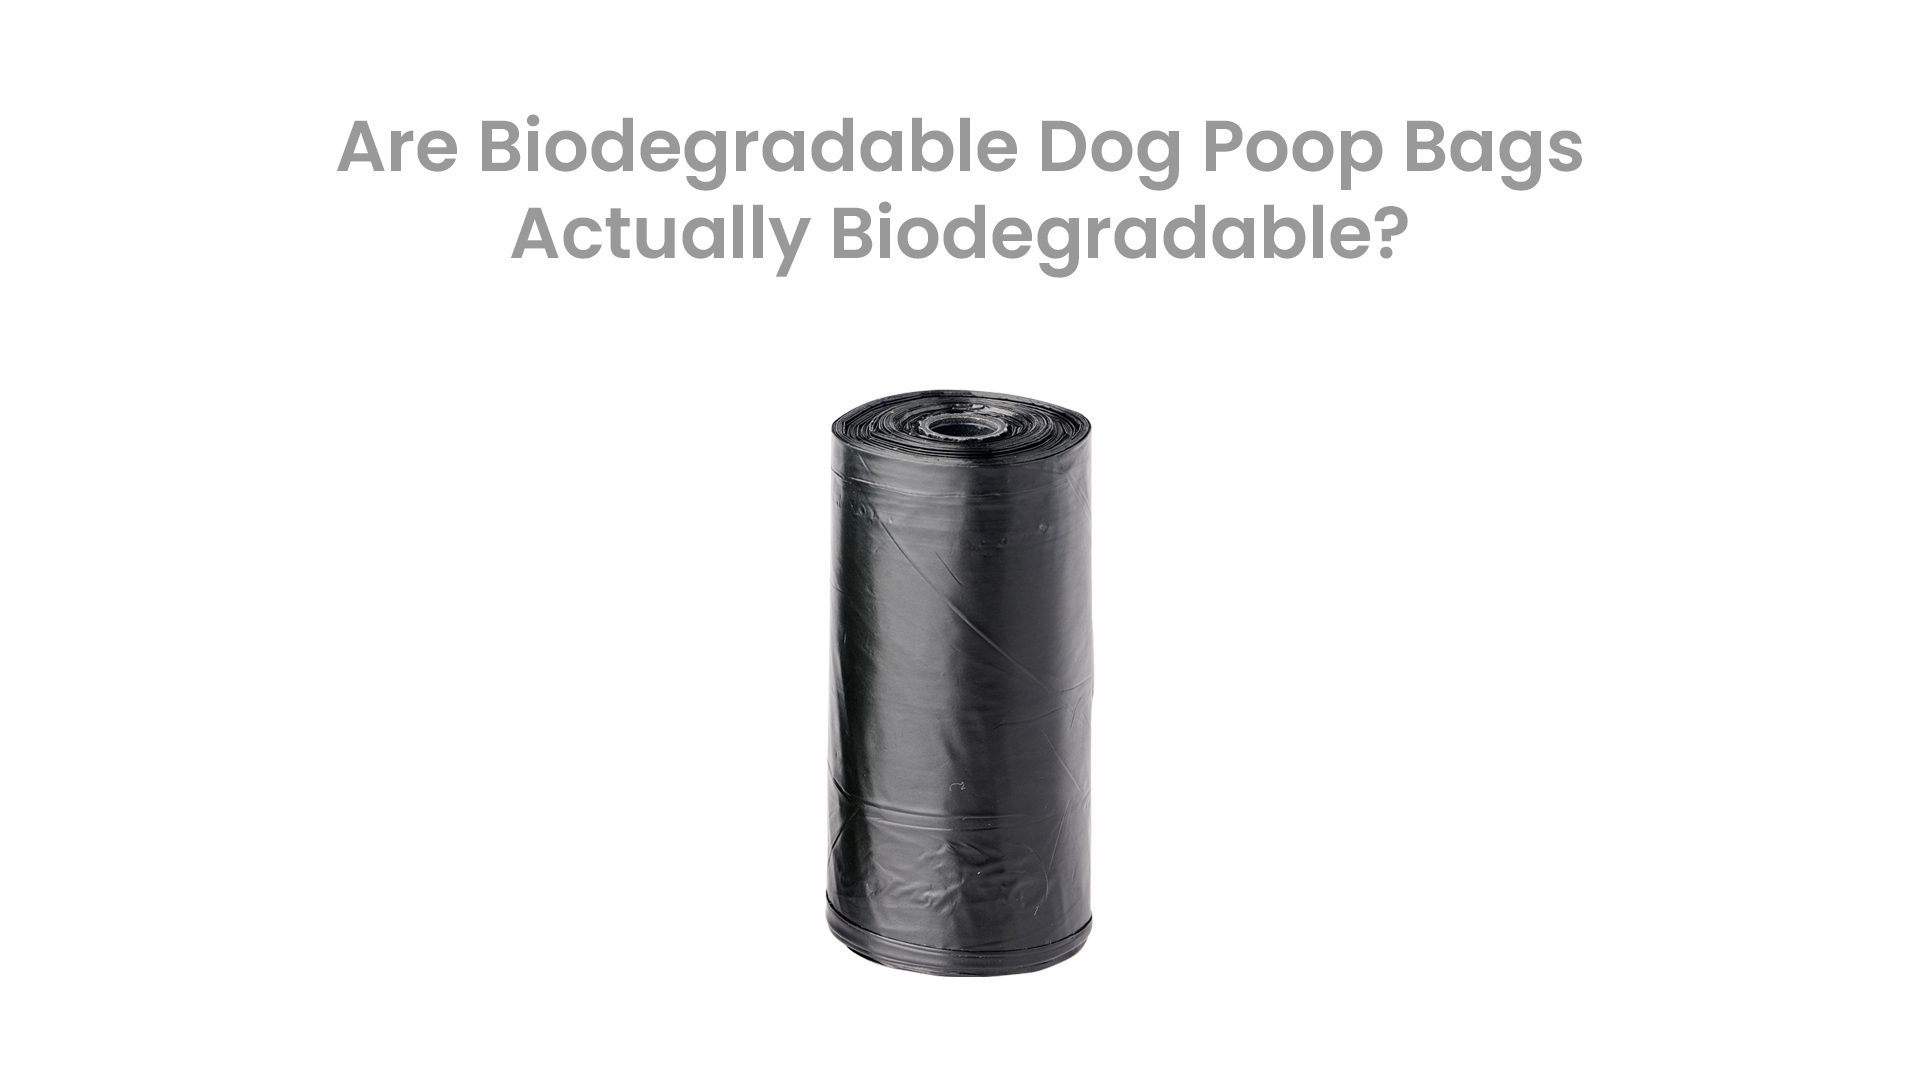 Image with the words - Are Biodegradable Dog Poop Bags Actually Biodegradable, on